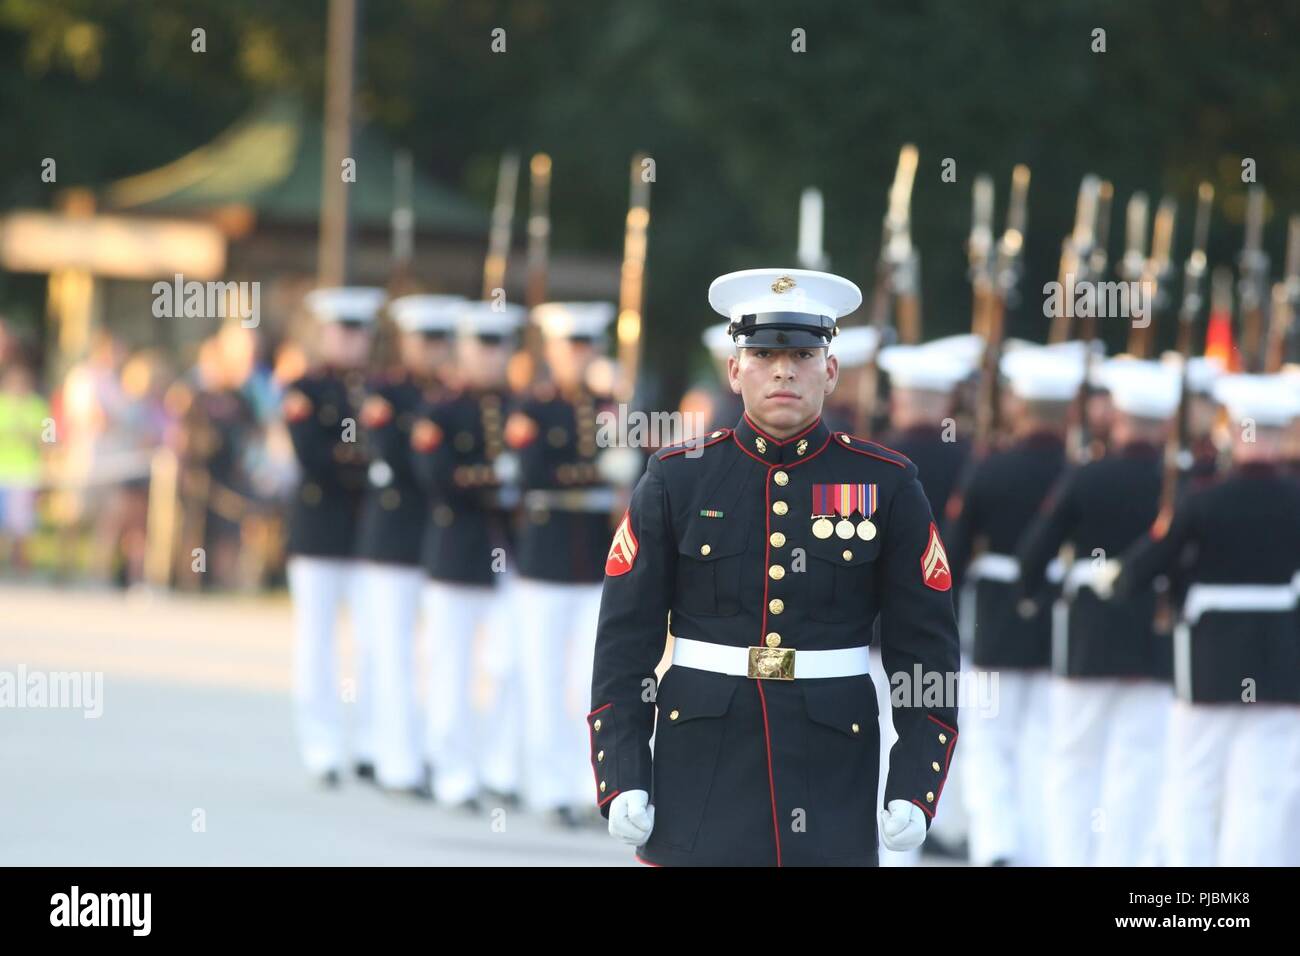 Corporal Christopher Ochoa, rifle inspector, U.S. Marine Corps Silent Drill Platoon, marches across the parade deck during a Tuesday Sunset Parade at the Lincoln Memorial, Washington D.C., July 10, 2018. The guest of honor for the parade was the former Vice President of the U.S., Joe Biden, and the hosting official was the Staff Judge Advocate to the Commandant of the Marine Corps, Maj. Gen. John R. Ewers Jr. Stock Photo